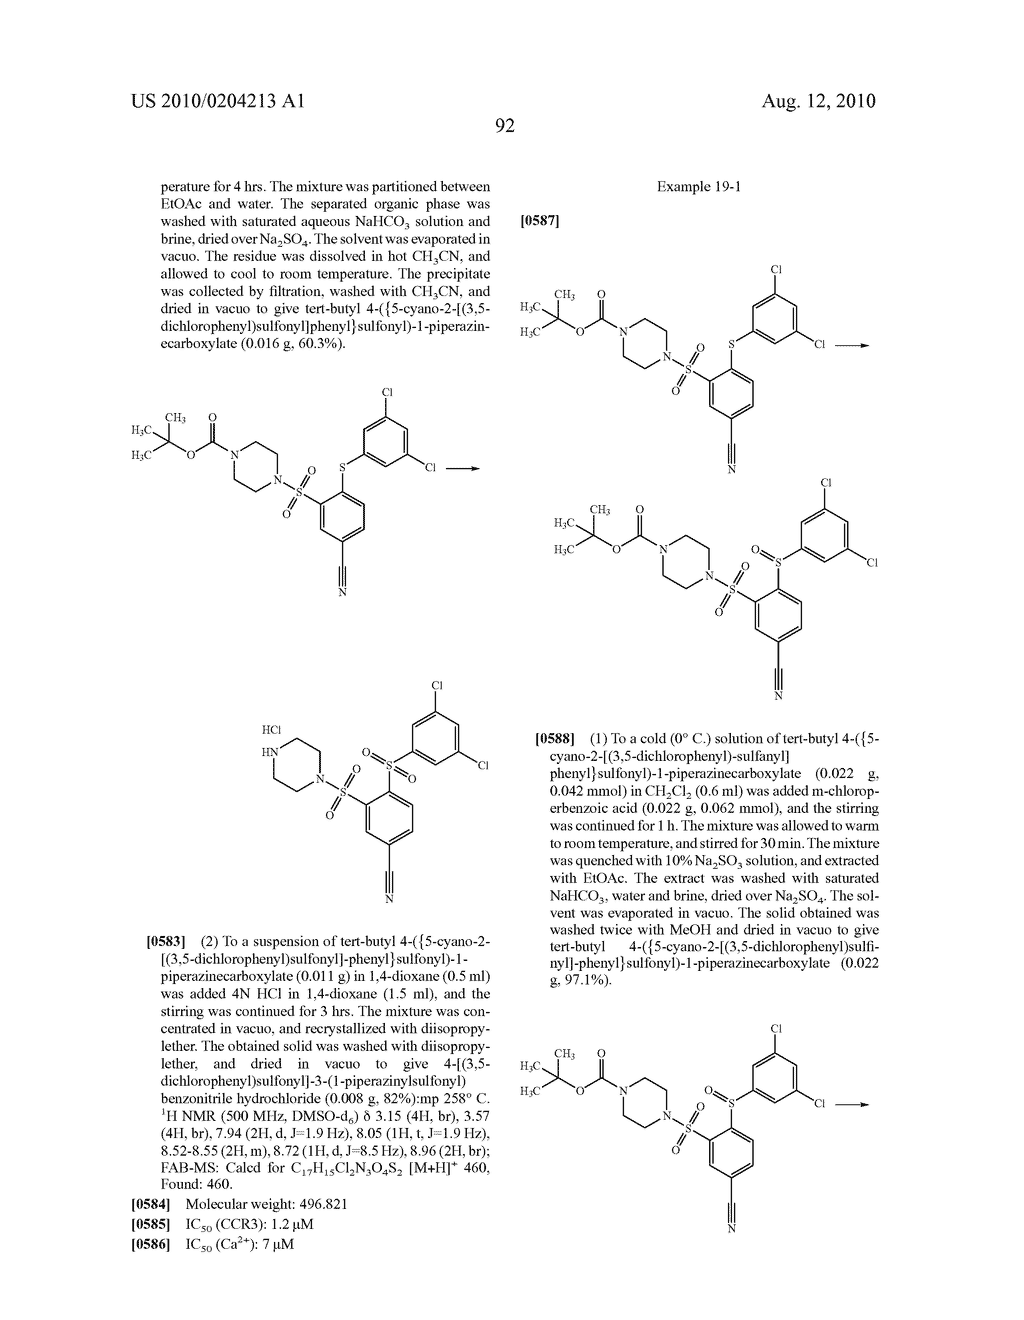 ARYLSULFONAMIDE DERIVATIVES FOR USE AS CCR3 ANTAGONISTS IN THE TREATMENT OF INFLAMMATORY AND IMMUNOLOGICAL DISORDERS - diagram, schematic, and image 93